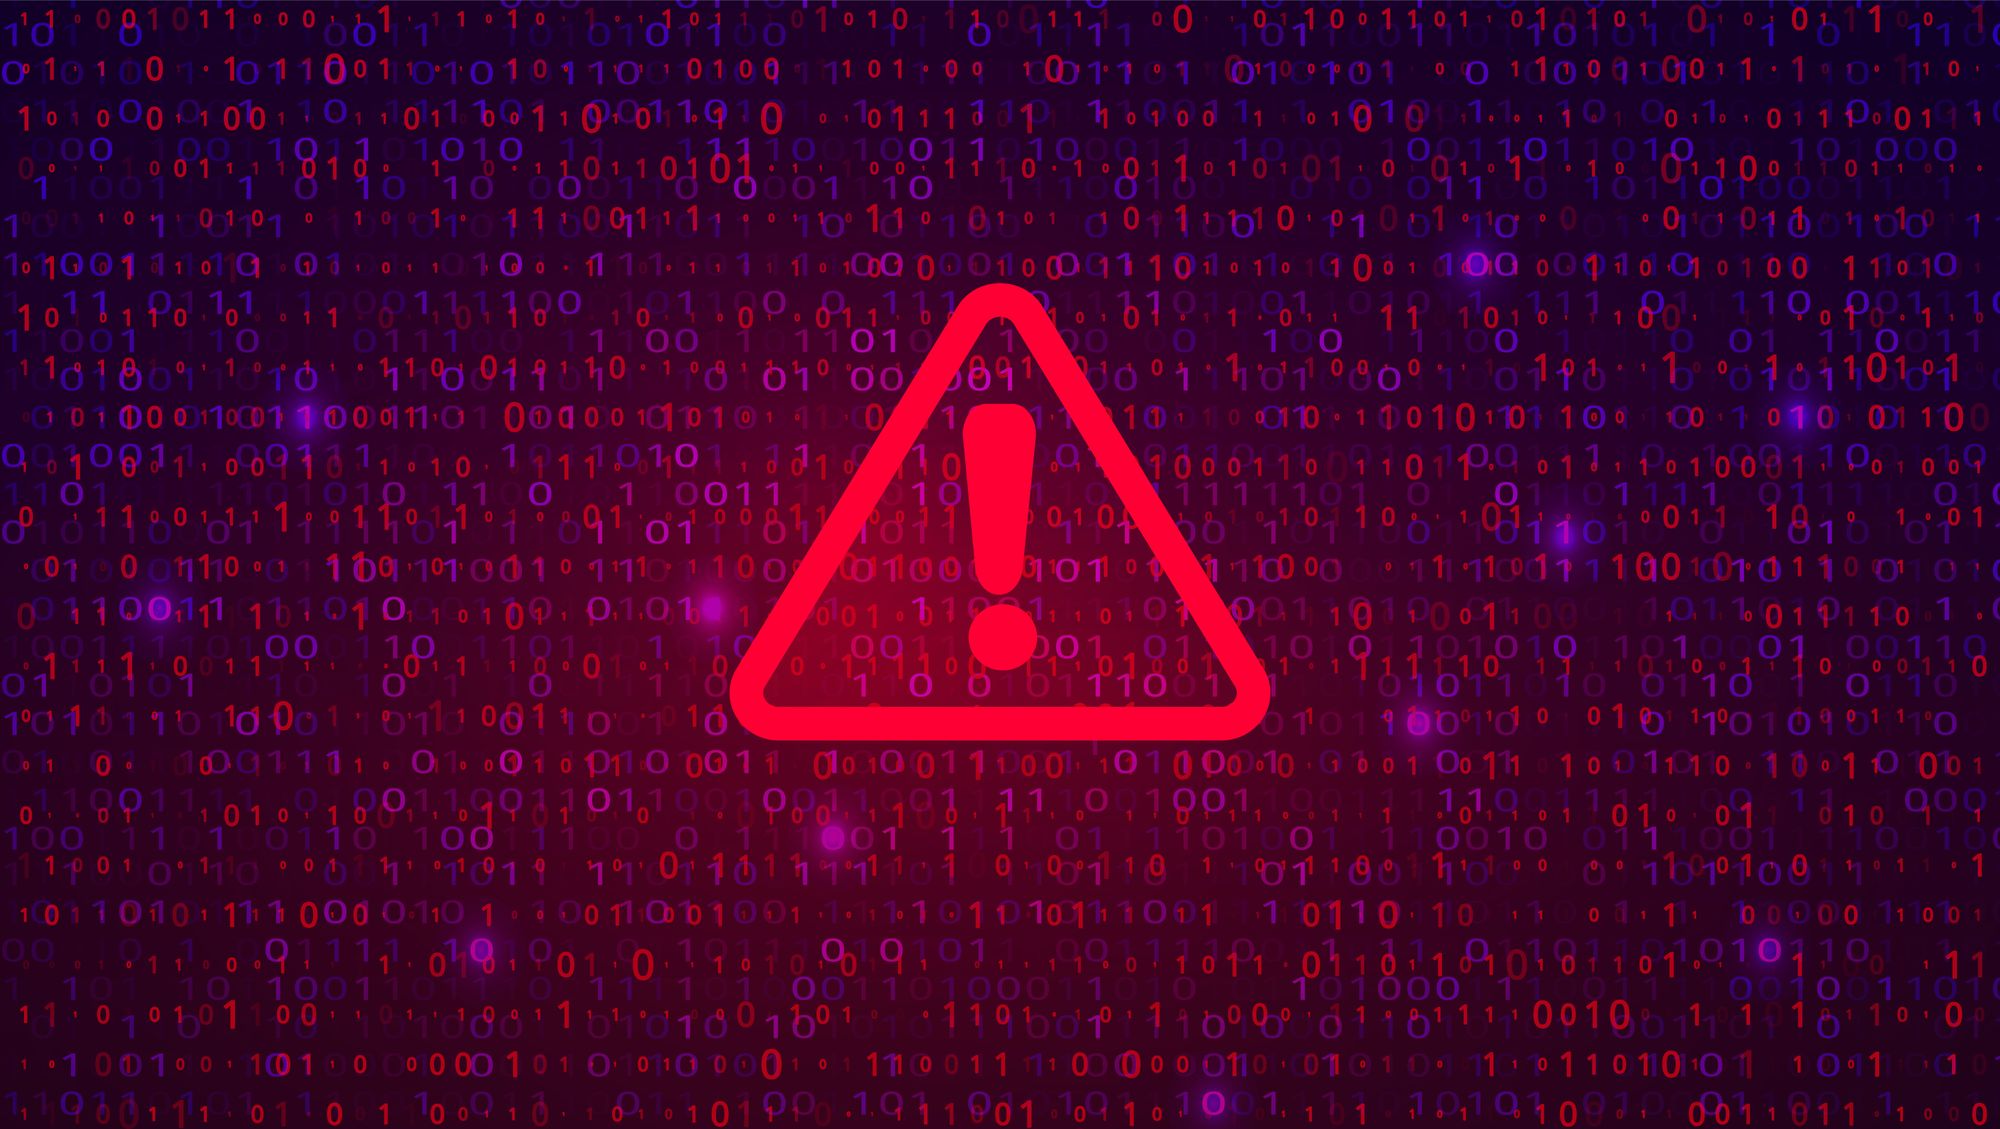 Rapid7 Observed Exploitation of Critical MOVEit Transfer Vulnerability